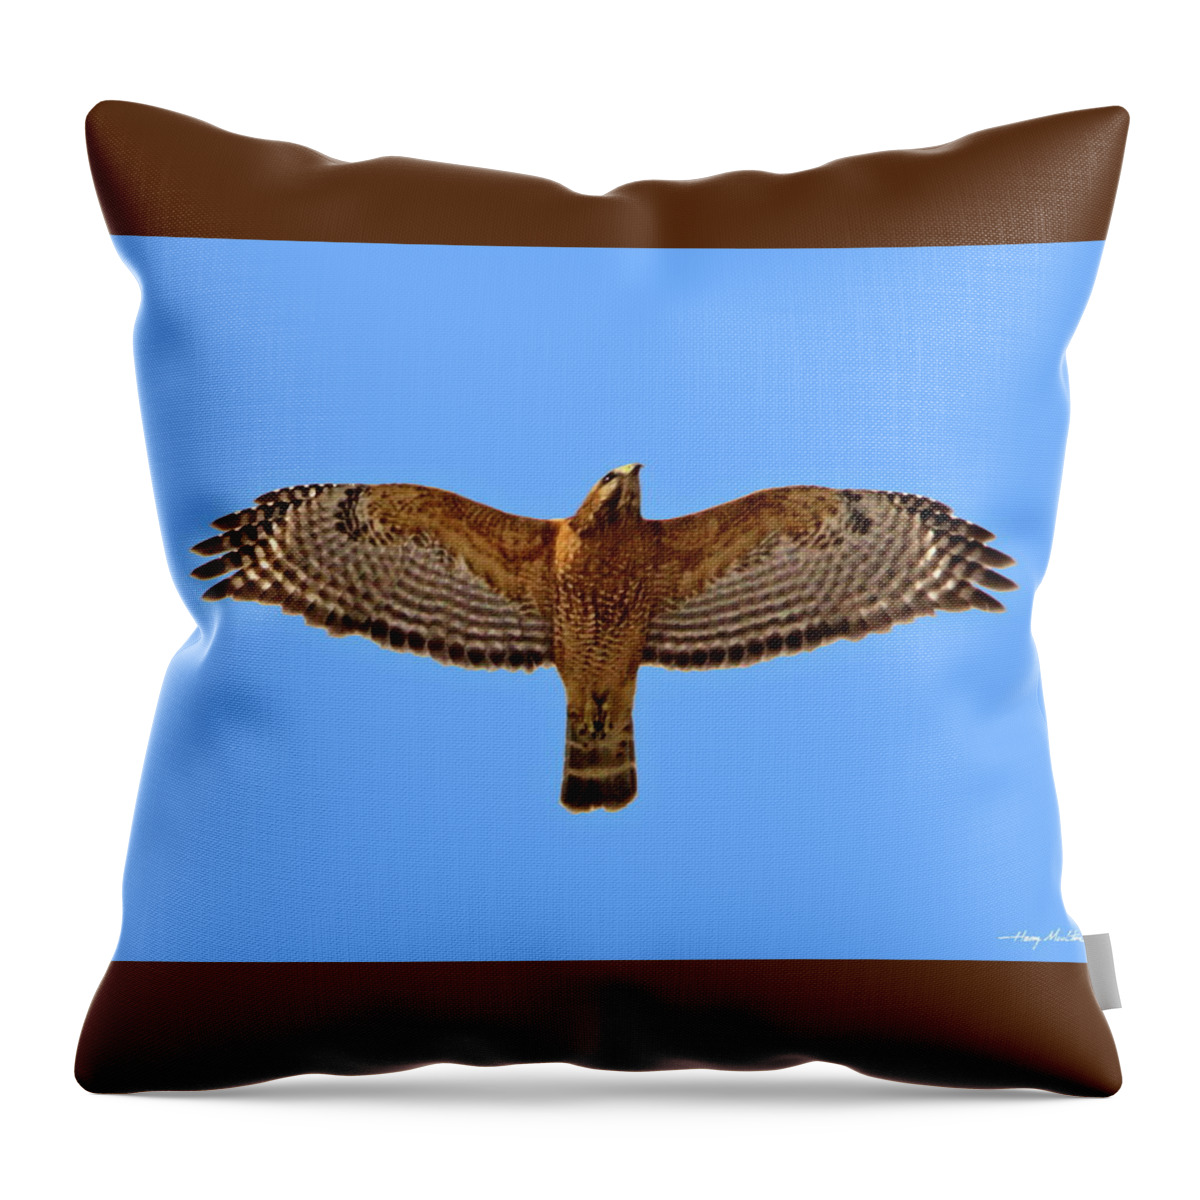 Birds Throw Pillow featuring the pyrography Red-shouldered Hawk by Harry Moulton